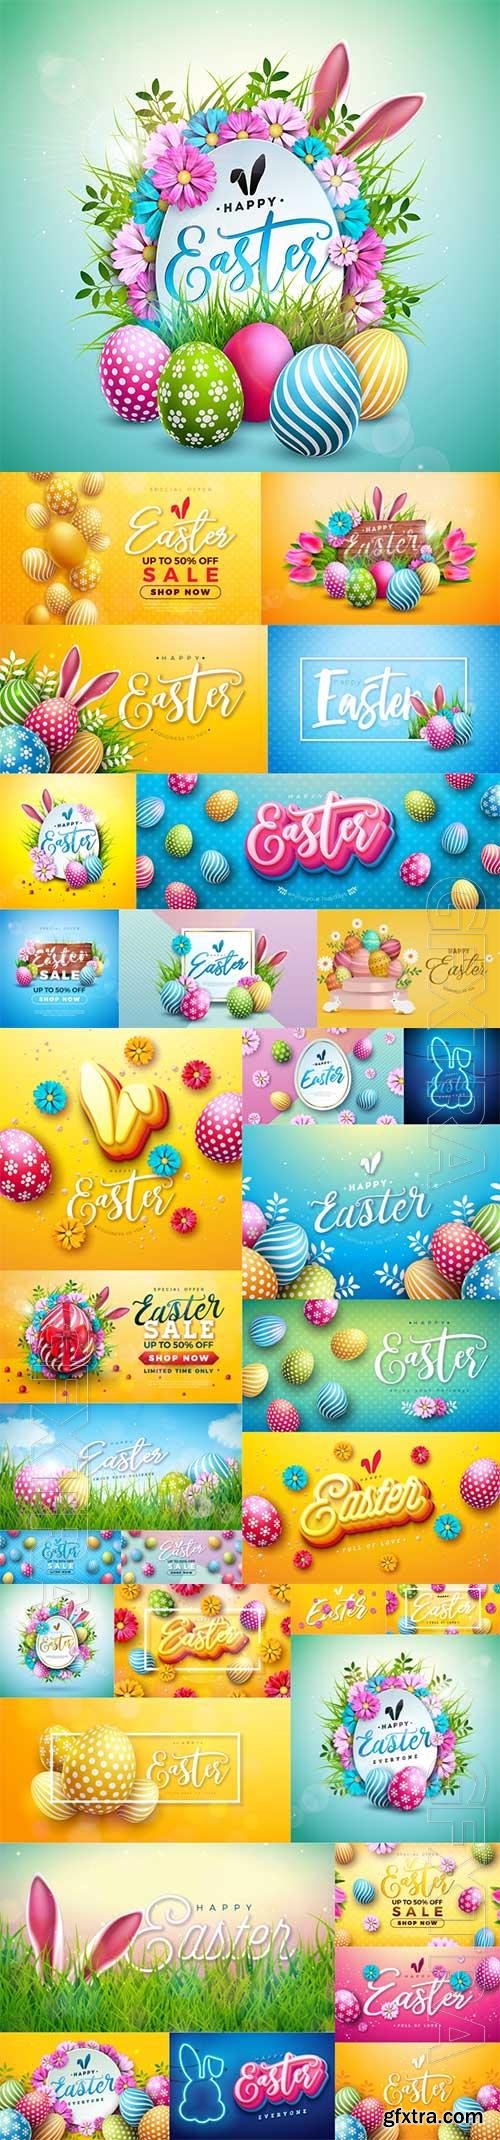 Vector illustration of happy easter holiday with colorful egg and bunny